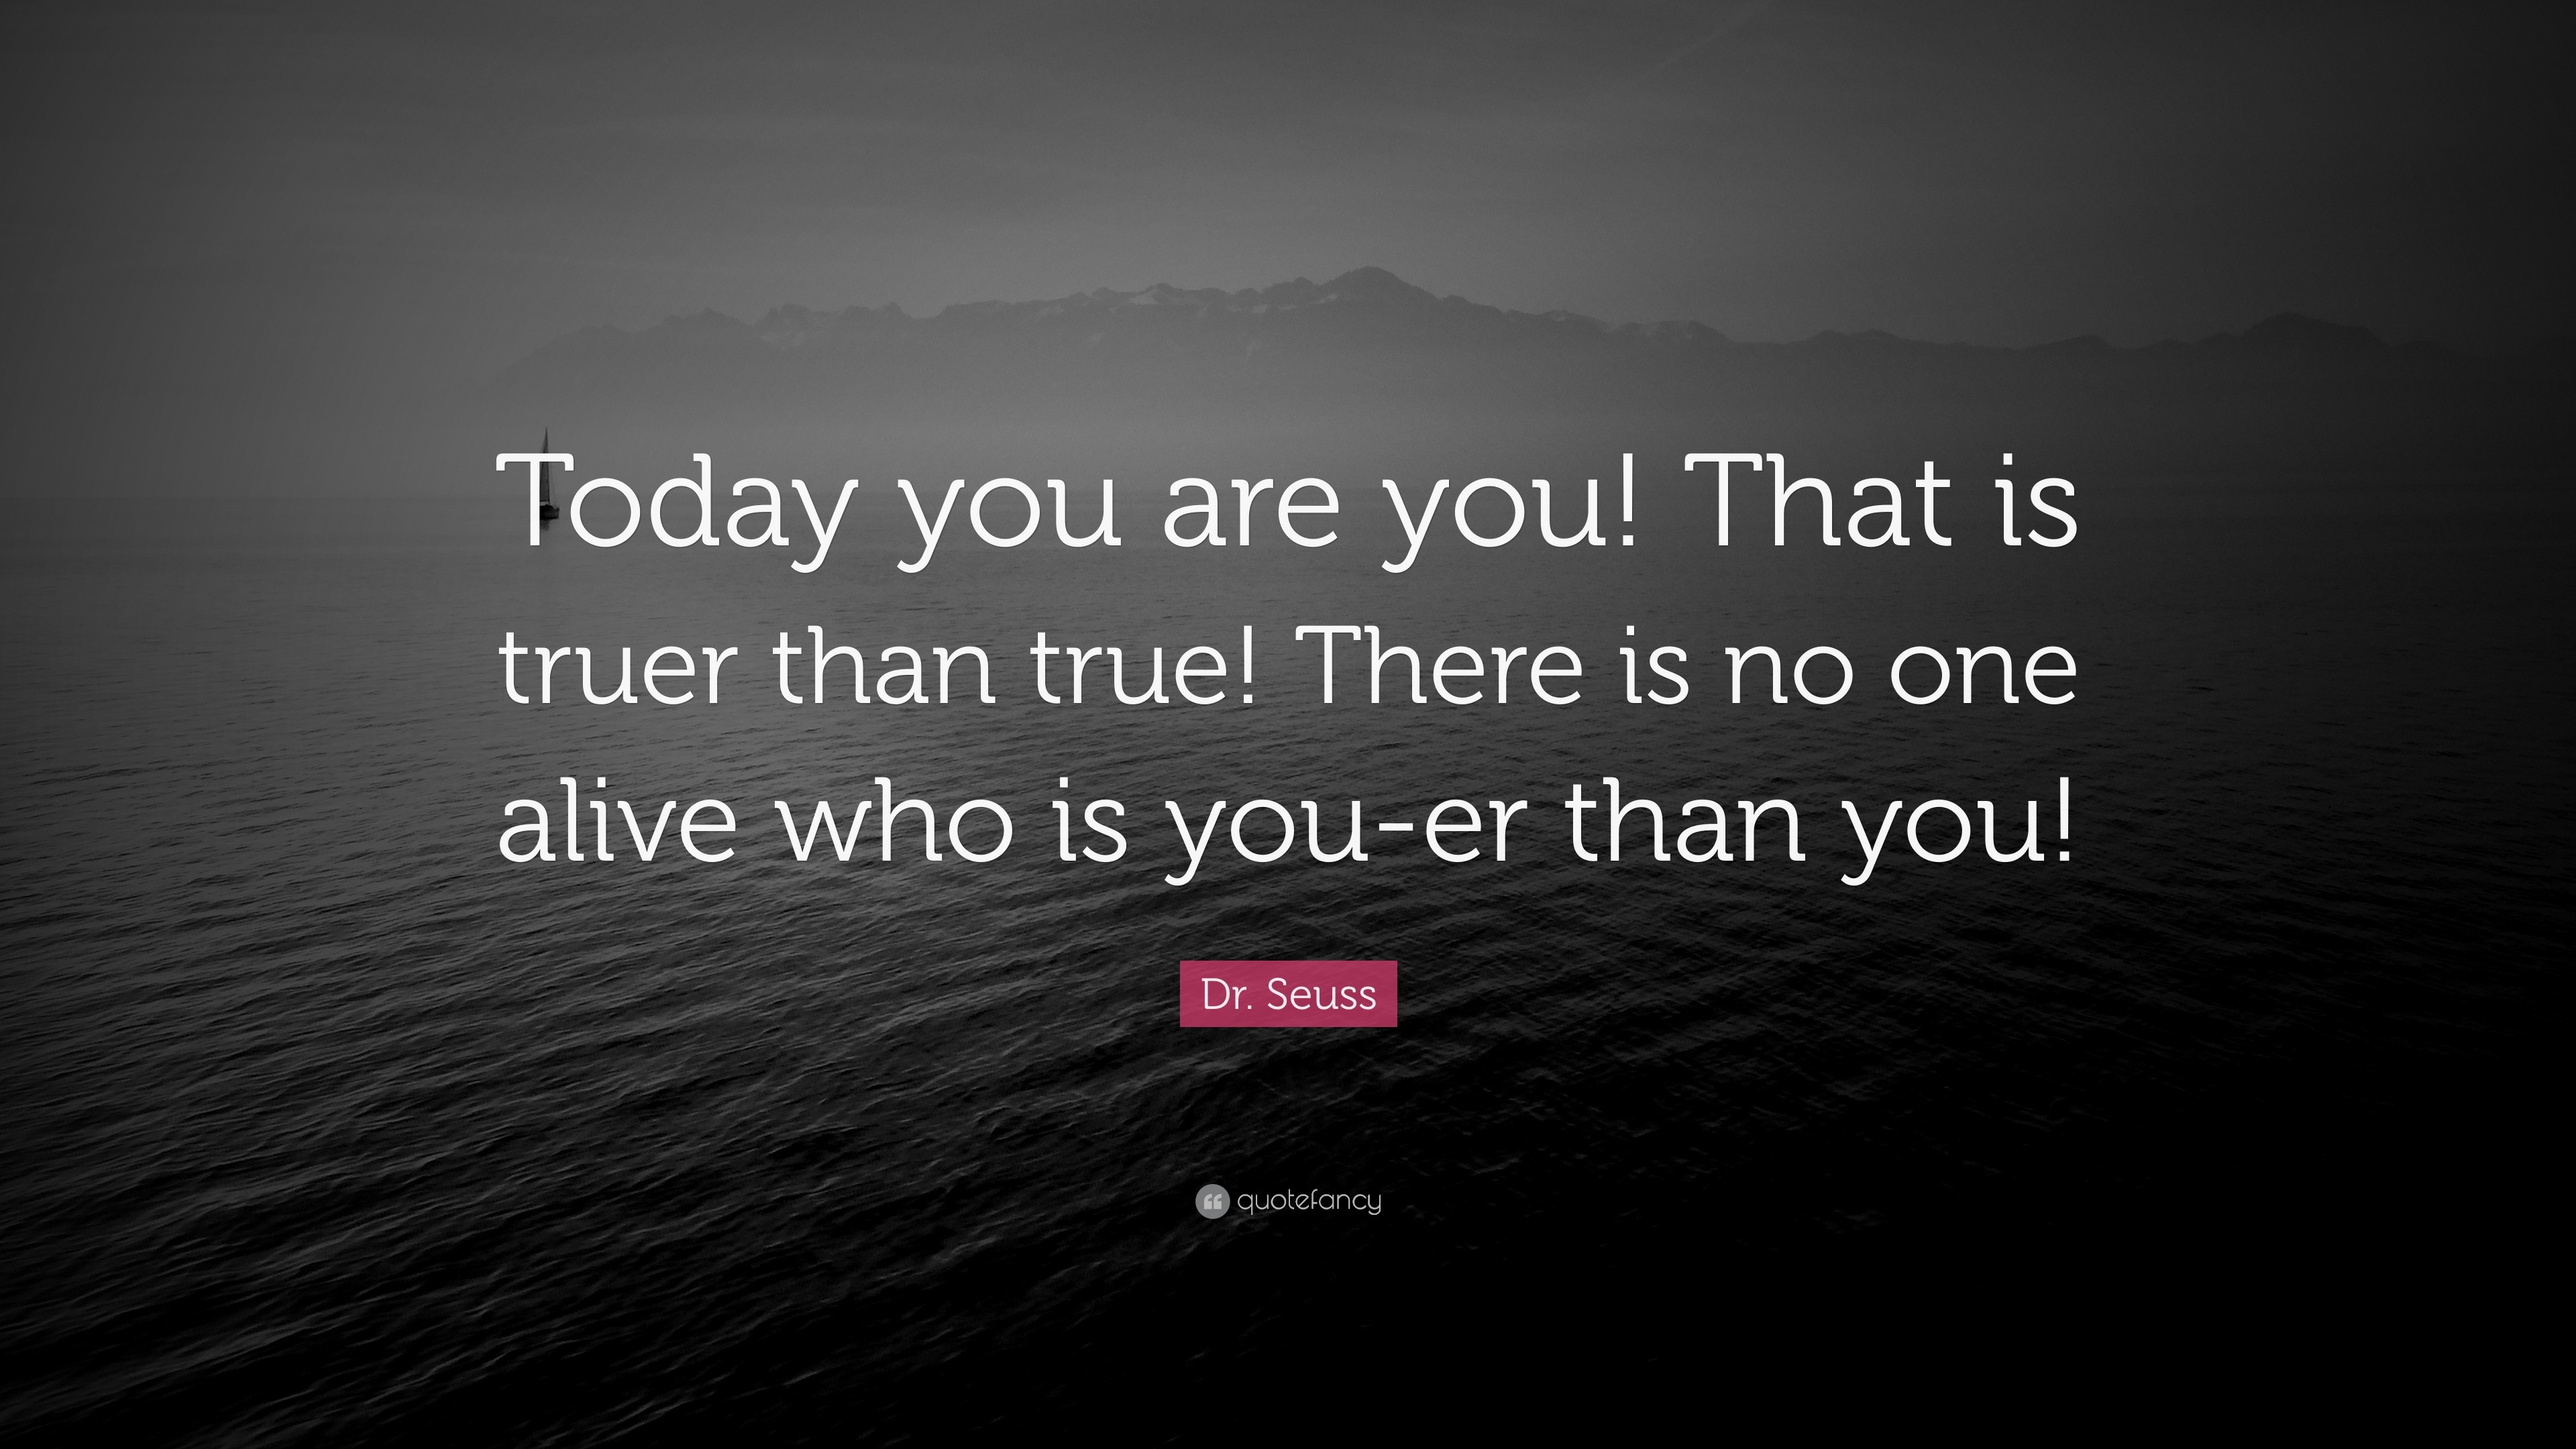 Dr. Seuss Quote: “Today you are you! That is truer than true! There is